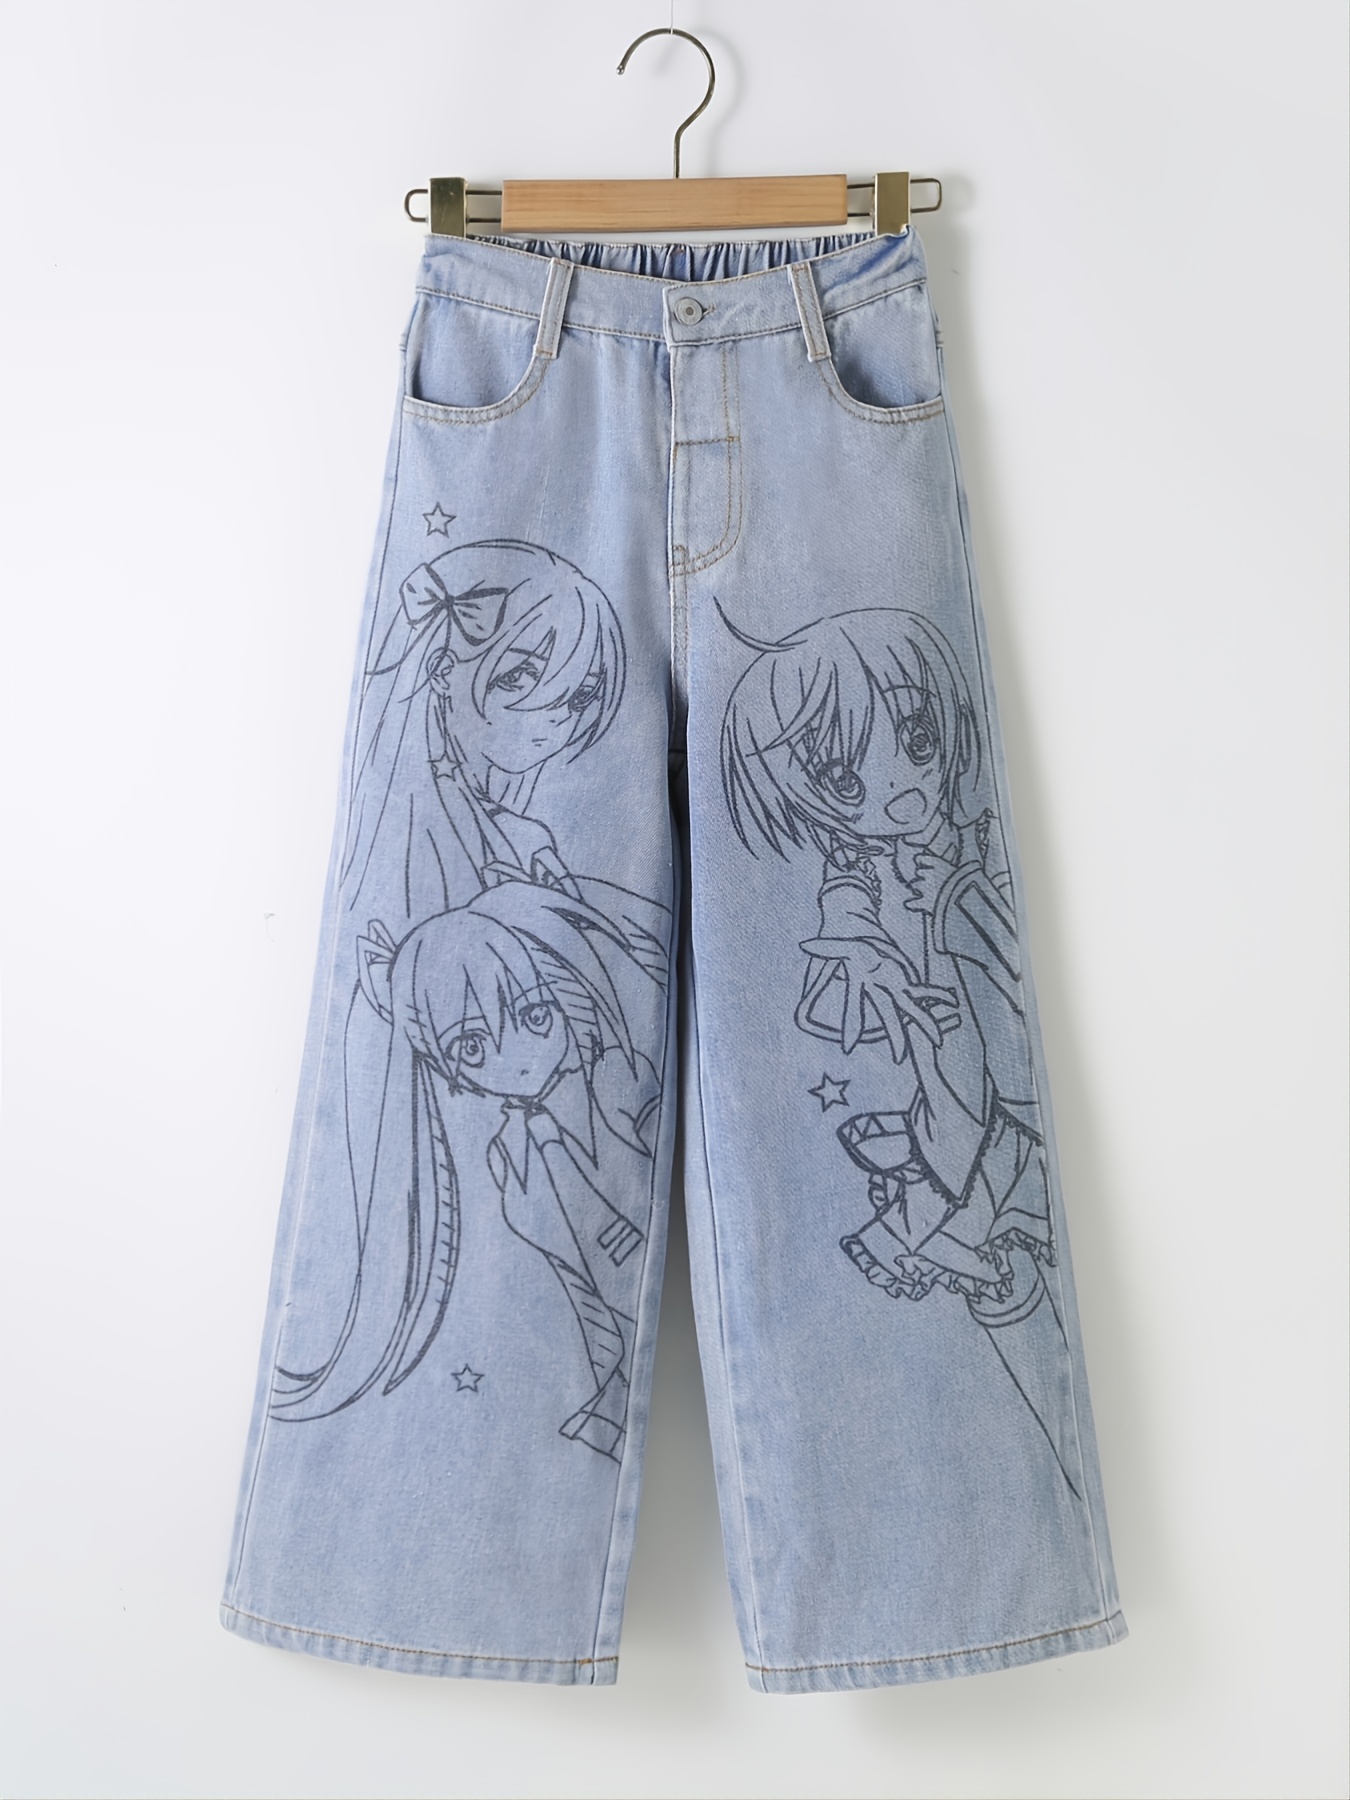 FOR HIRE] Custom anime handpainted clothes (jackets, hoodies, sneakers, etc  ) DM FOR MORE INFO : r/commissions